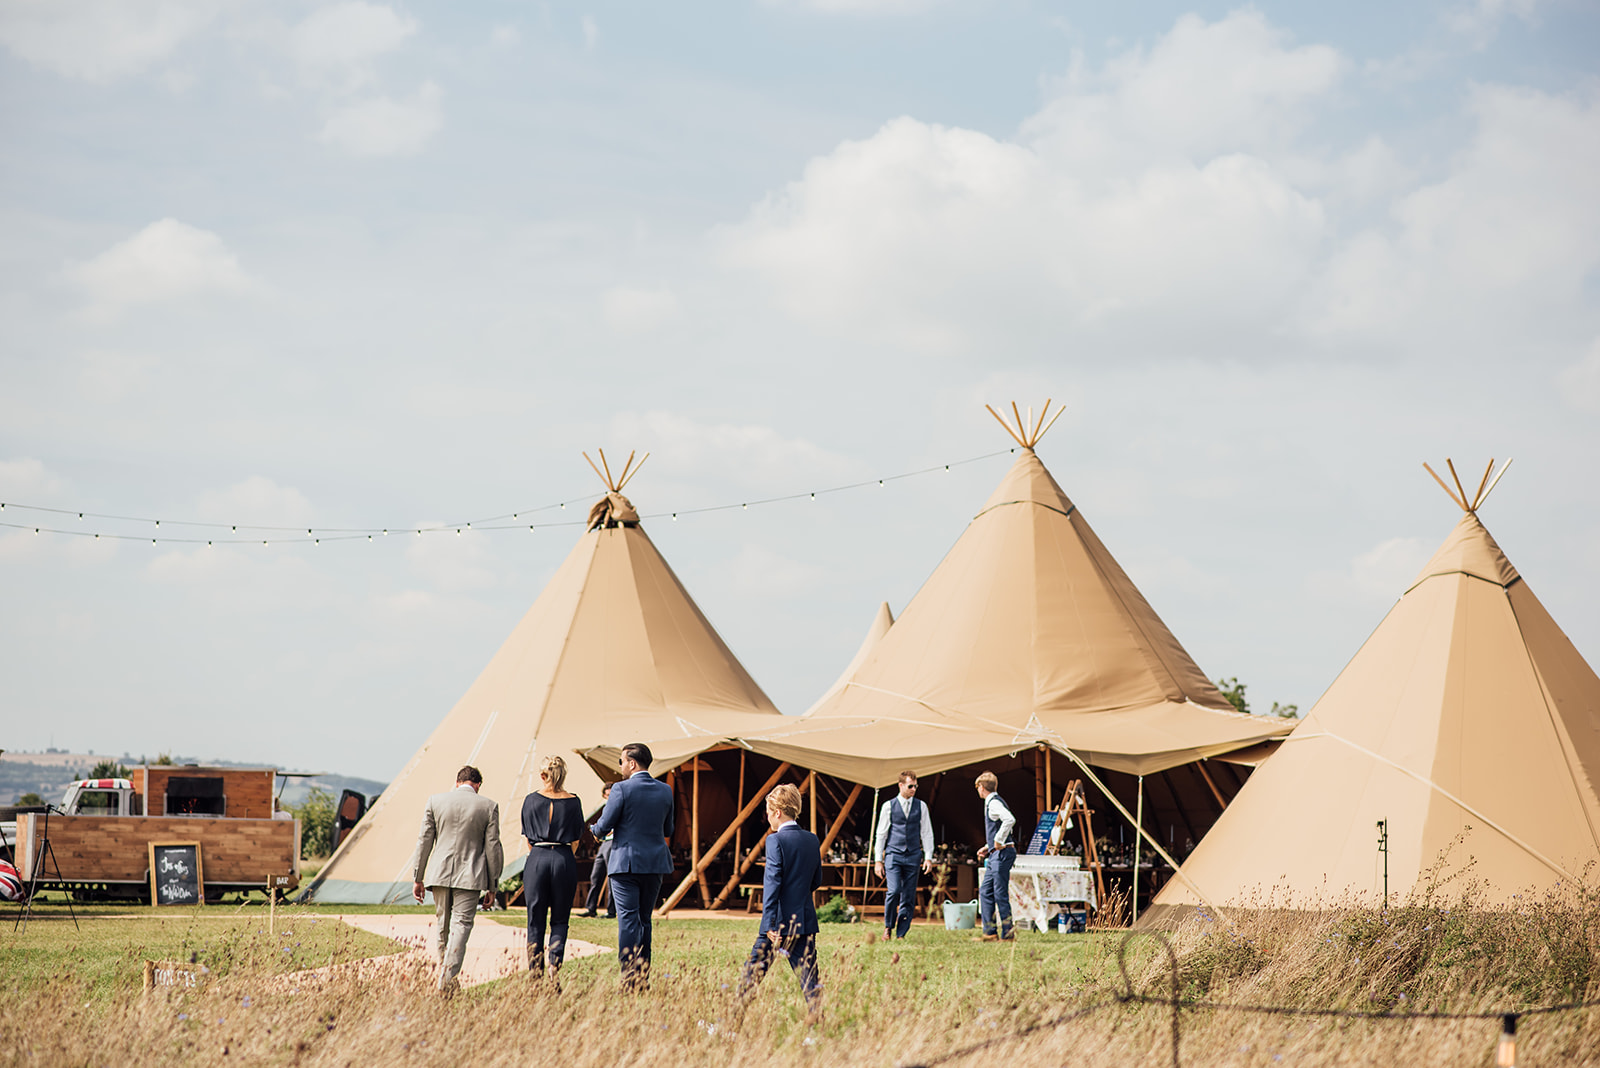 Our Tipis